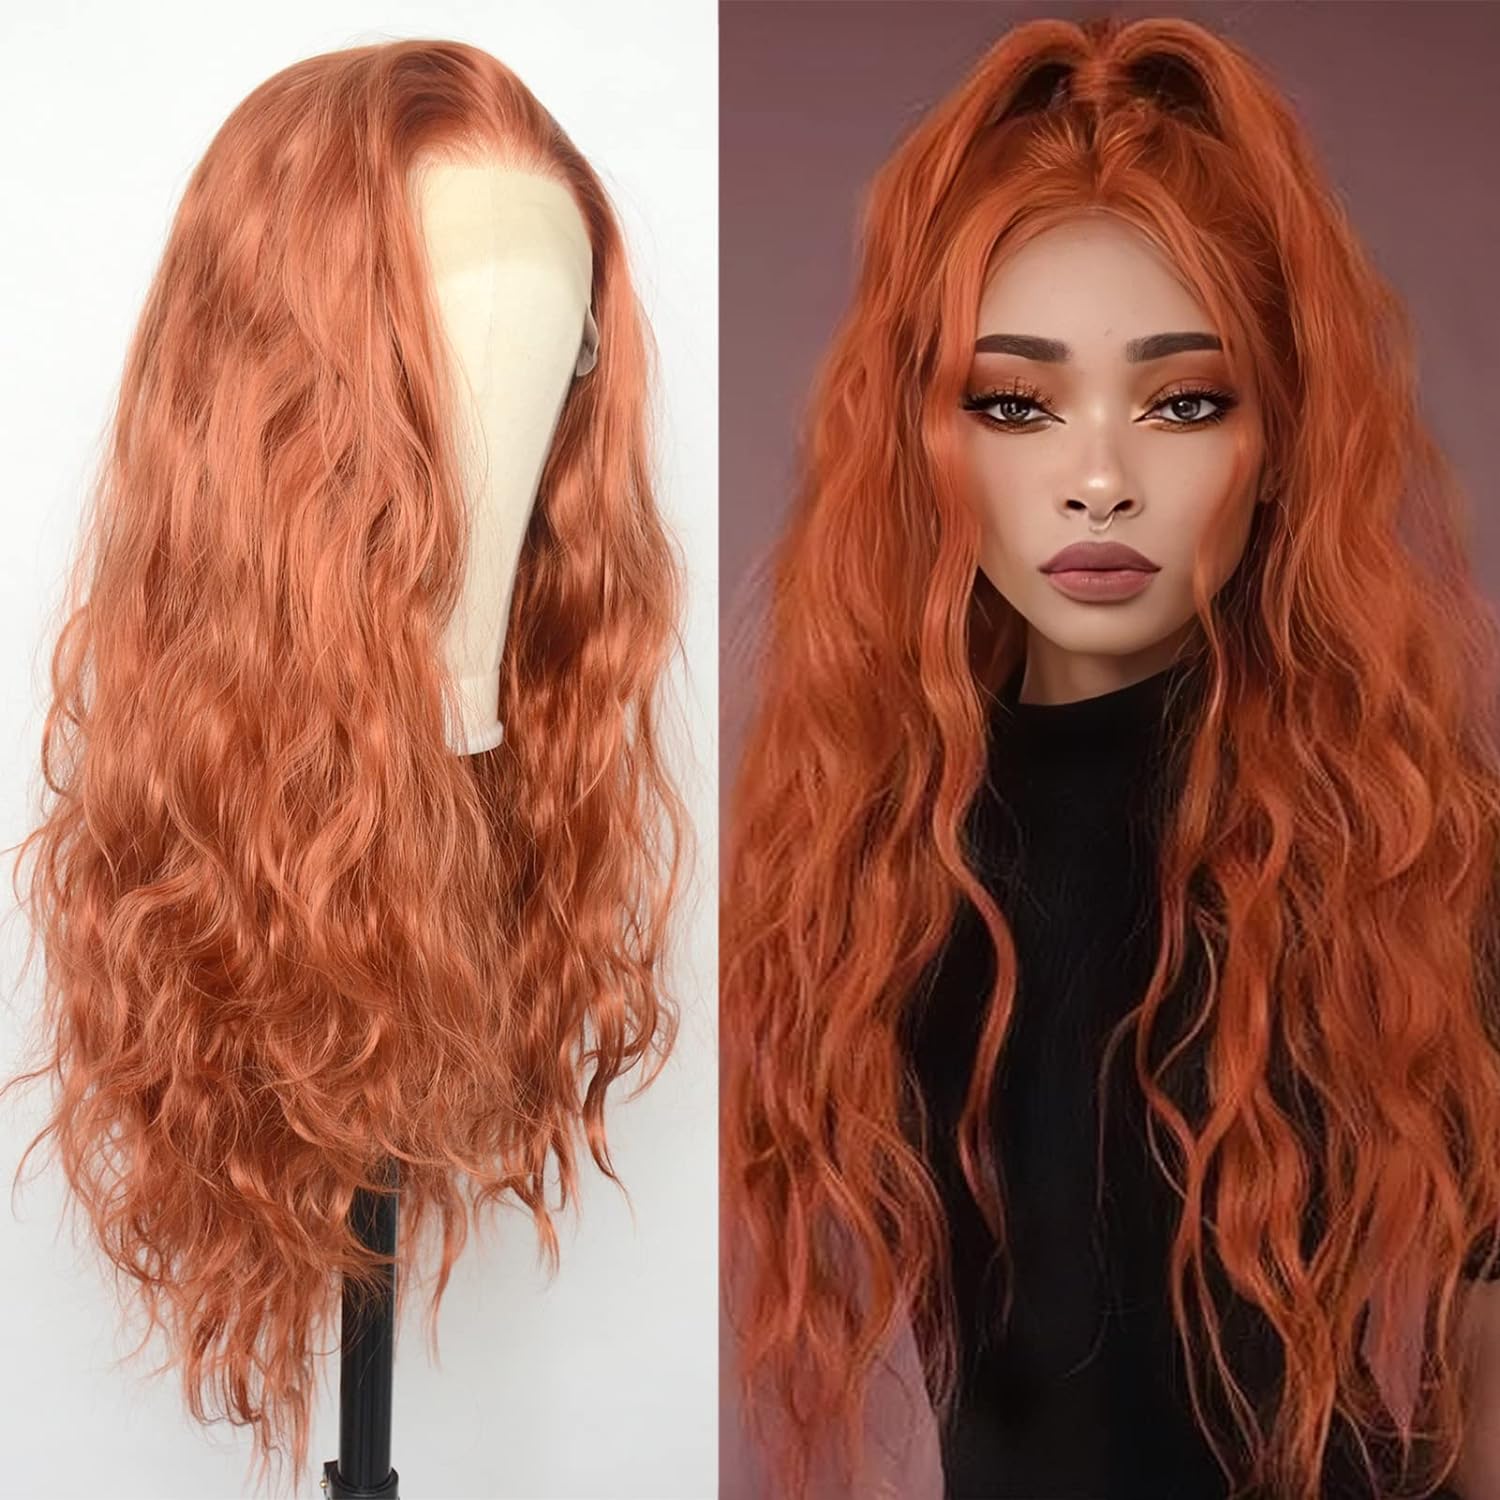 Luwigs 360 Copper Red Natural Wavy Lace Front Wigs Synthetic Loose Body Wave Gin